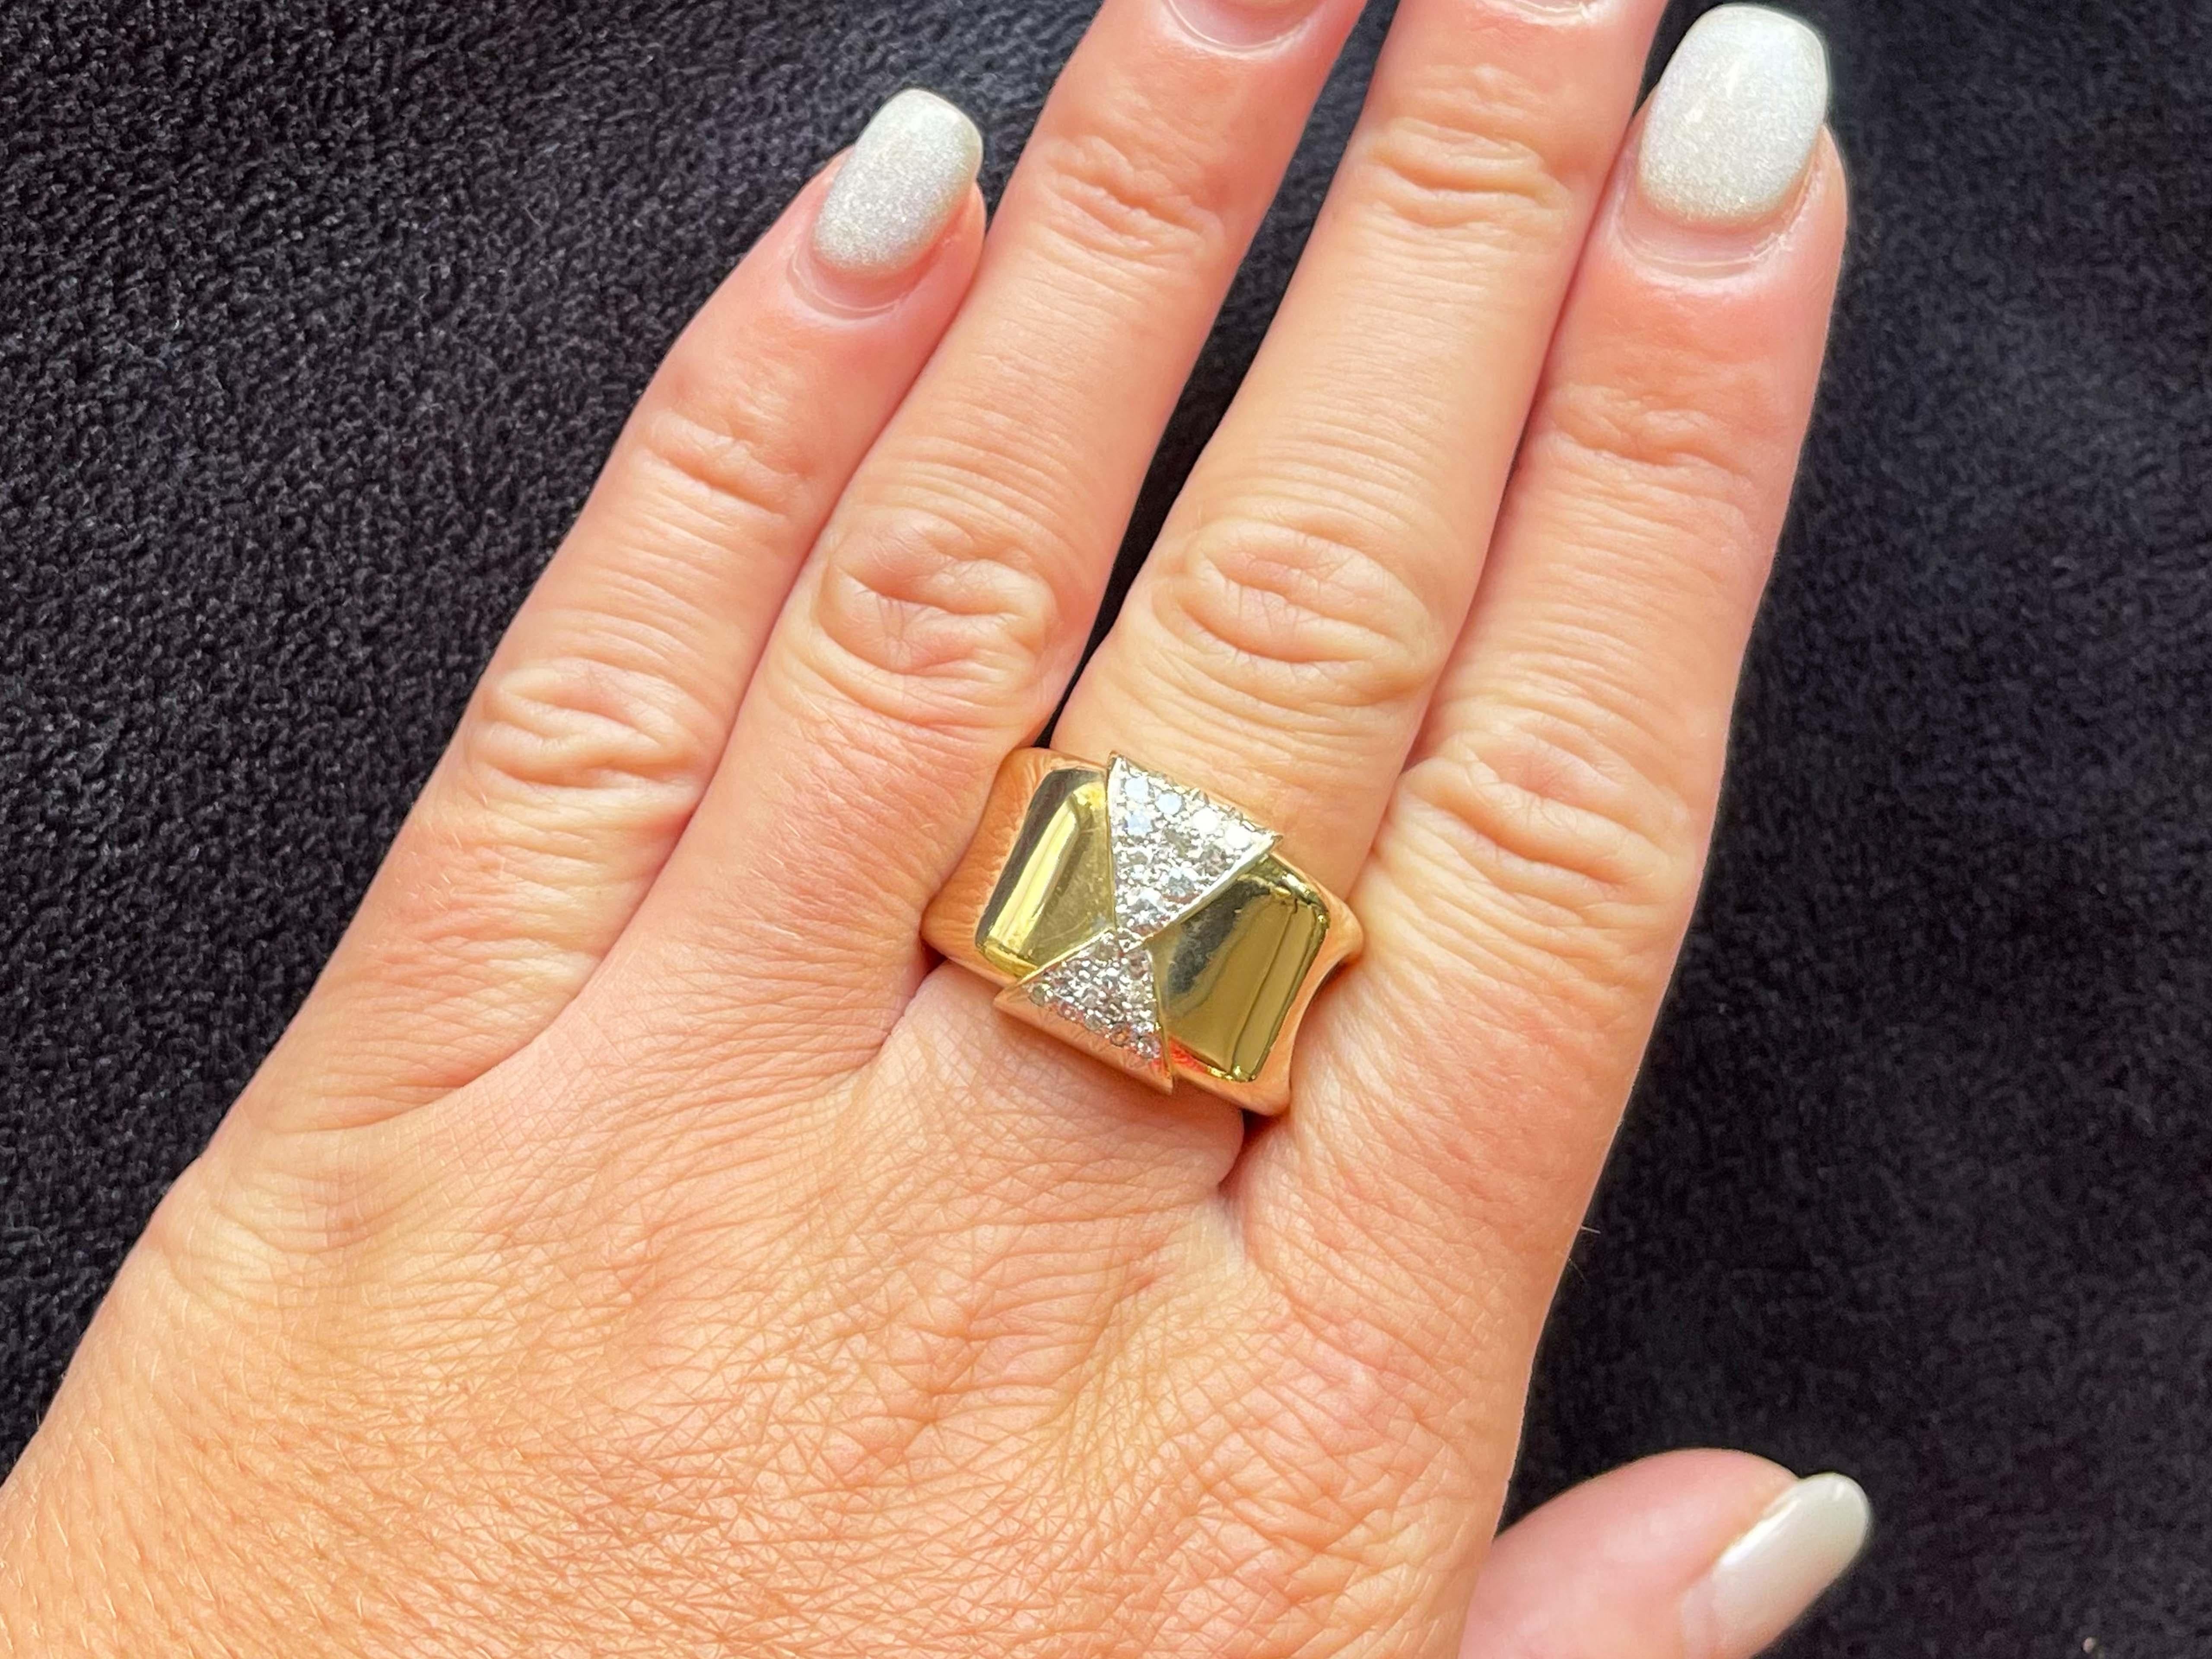 Item Specifications:

Metal: 18K Yellow Gold

Style: Statement Ring

Ring Size: 7.75 (resizing available for a fee)

Ring Height: 15.95 mm 

Total Weight: 18.7 Grams
​
​Diamond Cut: single cut, old European cut and brilliant cut

Diamond Carat